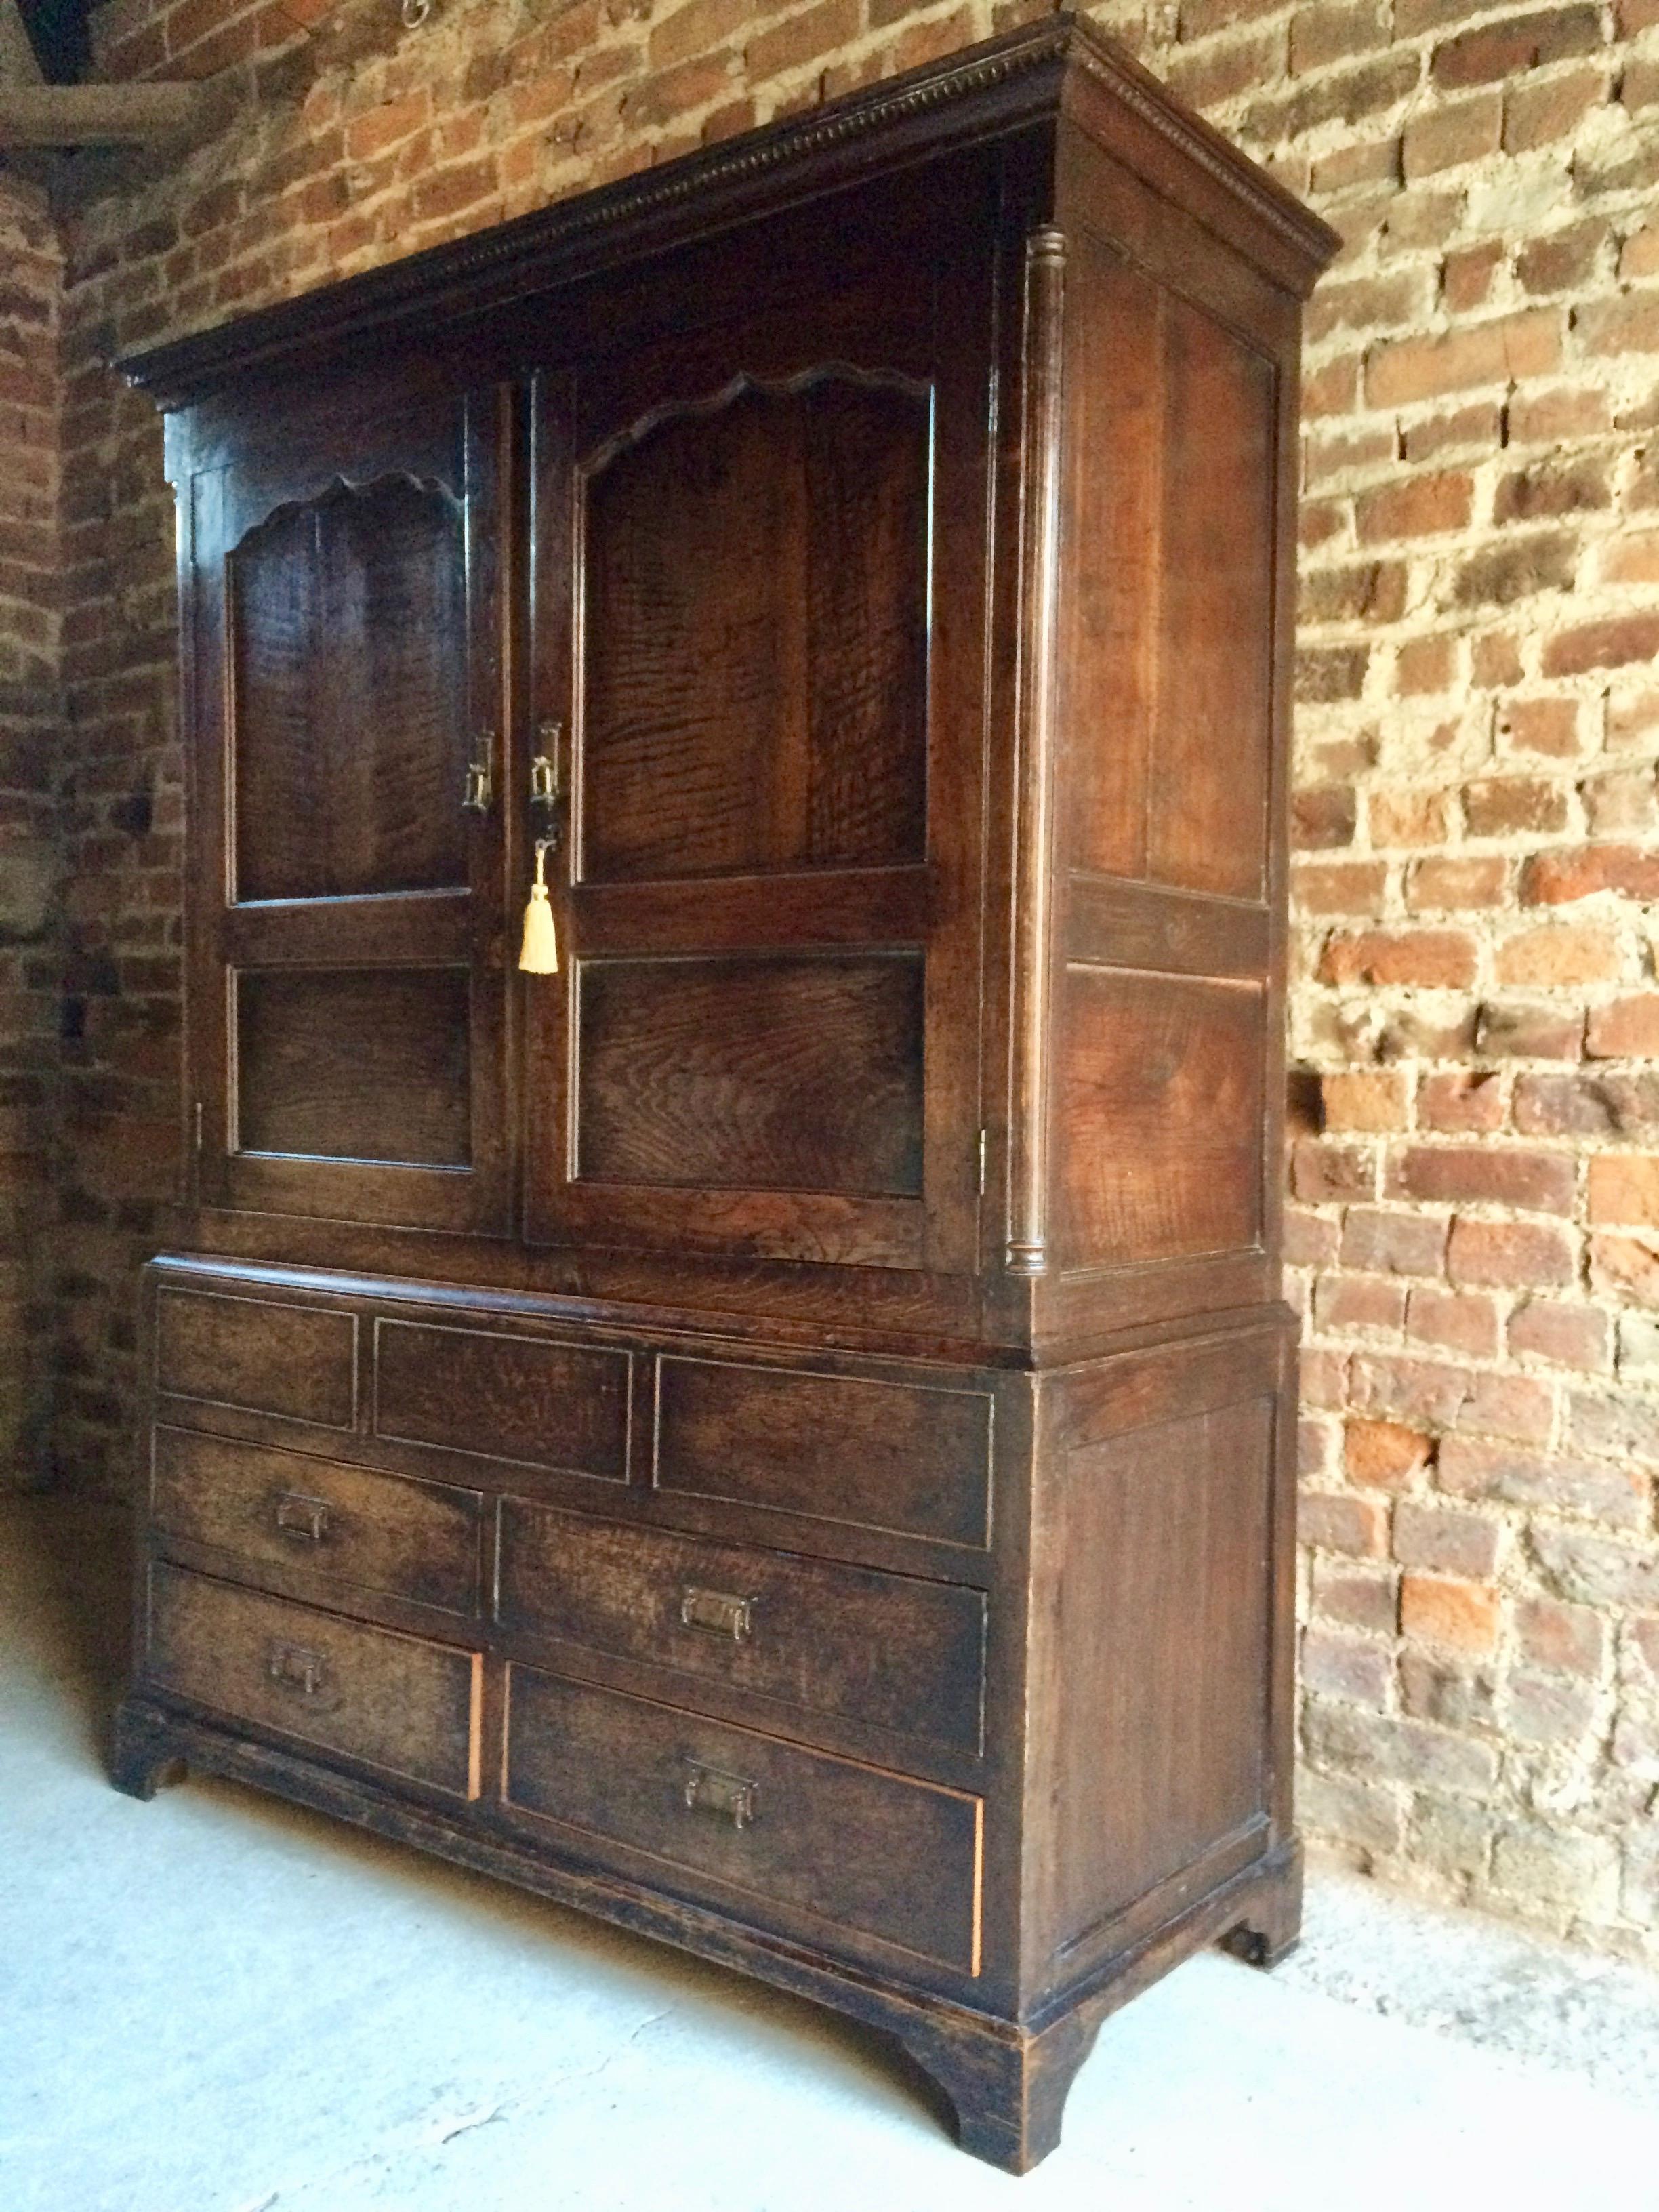 Antique hall cupboard solid oak Victorian, 19th century, circa 1890

A very handsome 19th century antique solid oak hall cupboard, circa 1890, the corniced top over two panelled doors with a number of hanging hooks within, above four short drawers